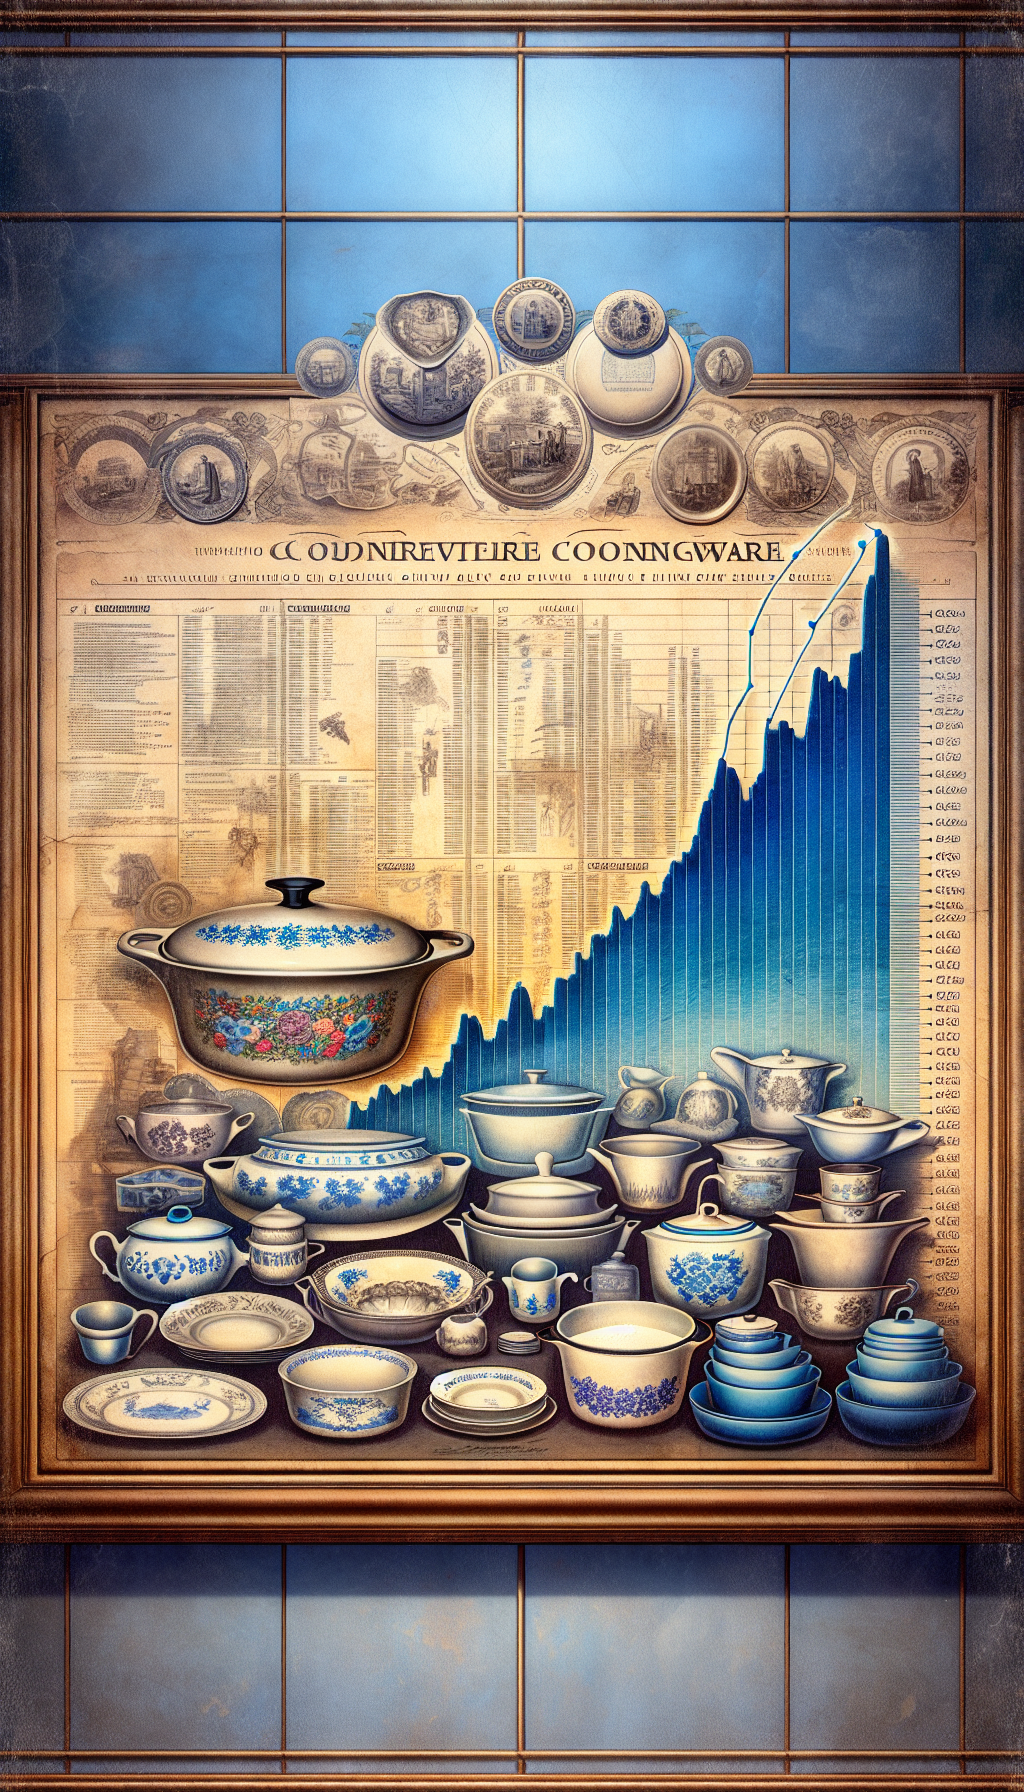 An illustrated montage features iconic CorningWare pieces overlaid on a faded parchment backdrop with historical dates and milestones meandering upwards. A semi-transparent graph foregrounds the image, showing the rising value trend of vintage CorningWare, with a prized Blue Cornflower casserole at the peak, subtly glowing to signify its high collectible status.